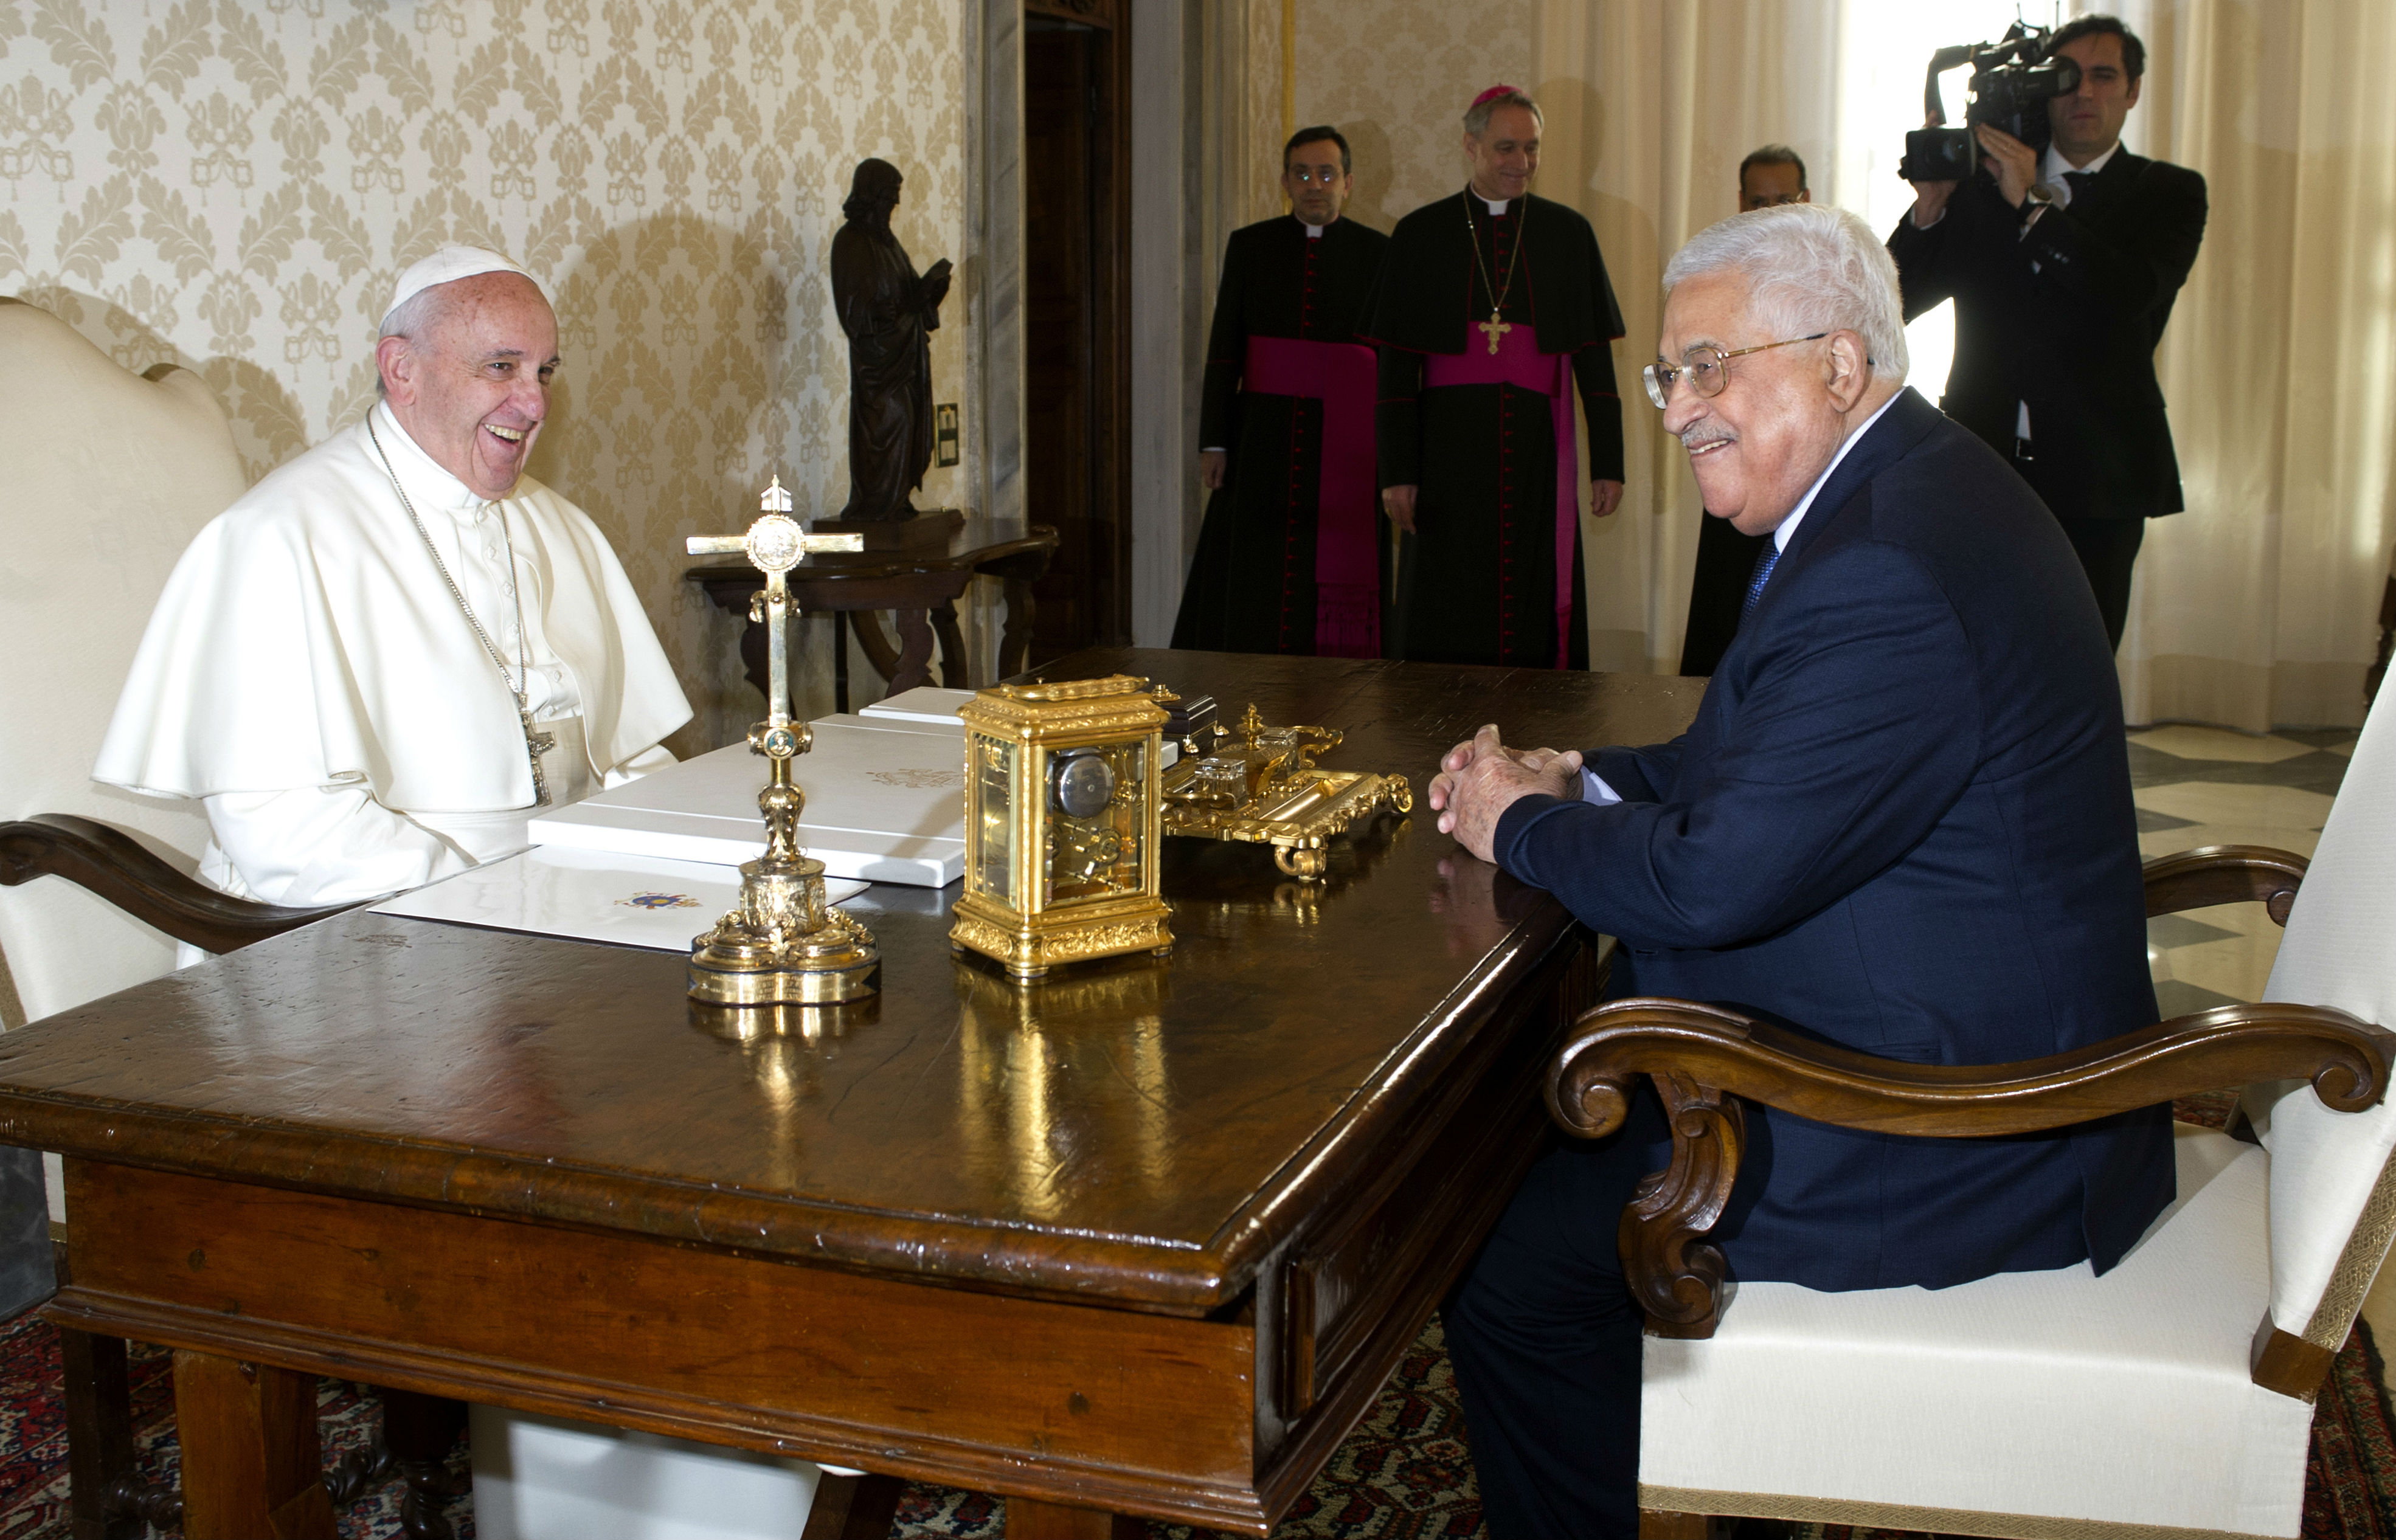 Pope meets Palestinian President as world leaders recommit to two-state solution 